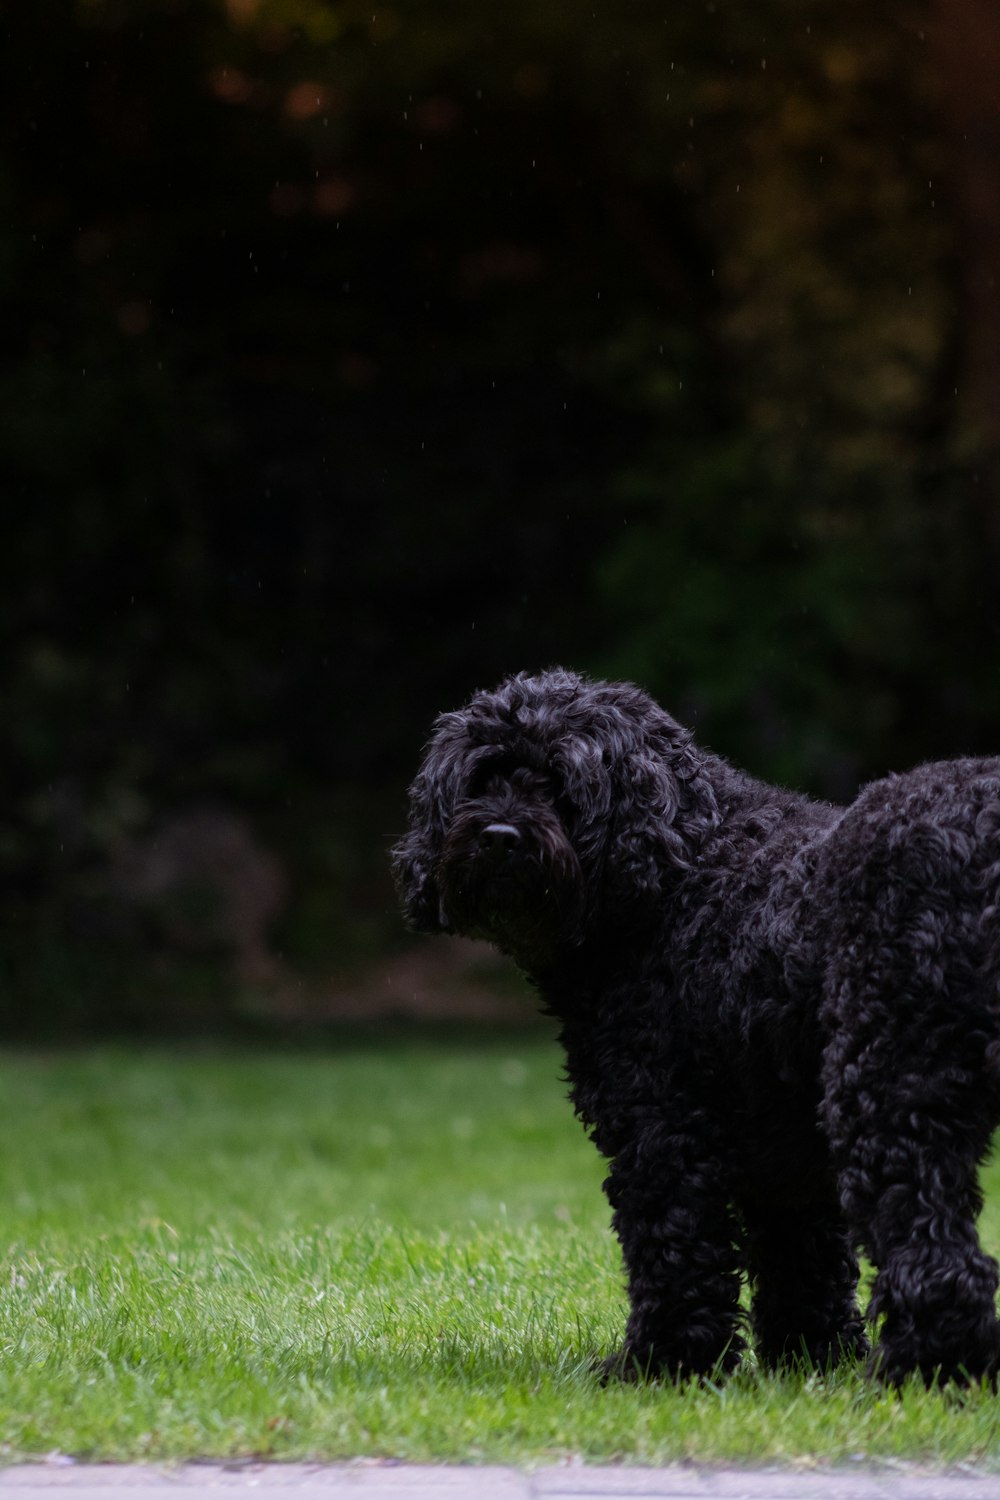 black poodle on green grass field during daytime